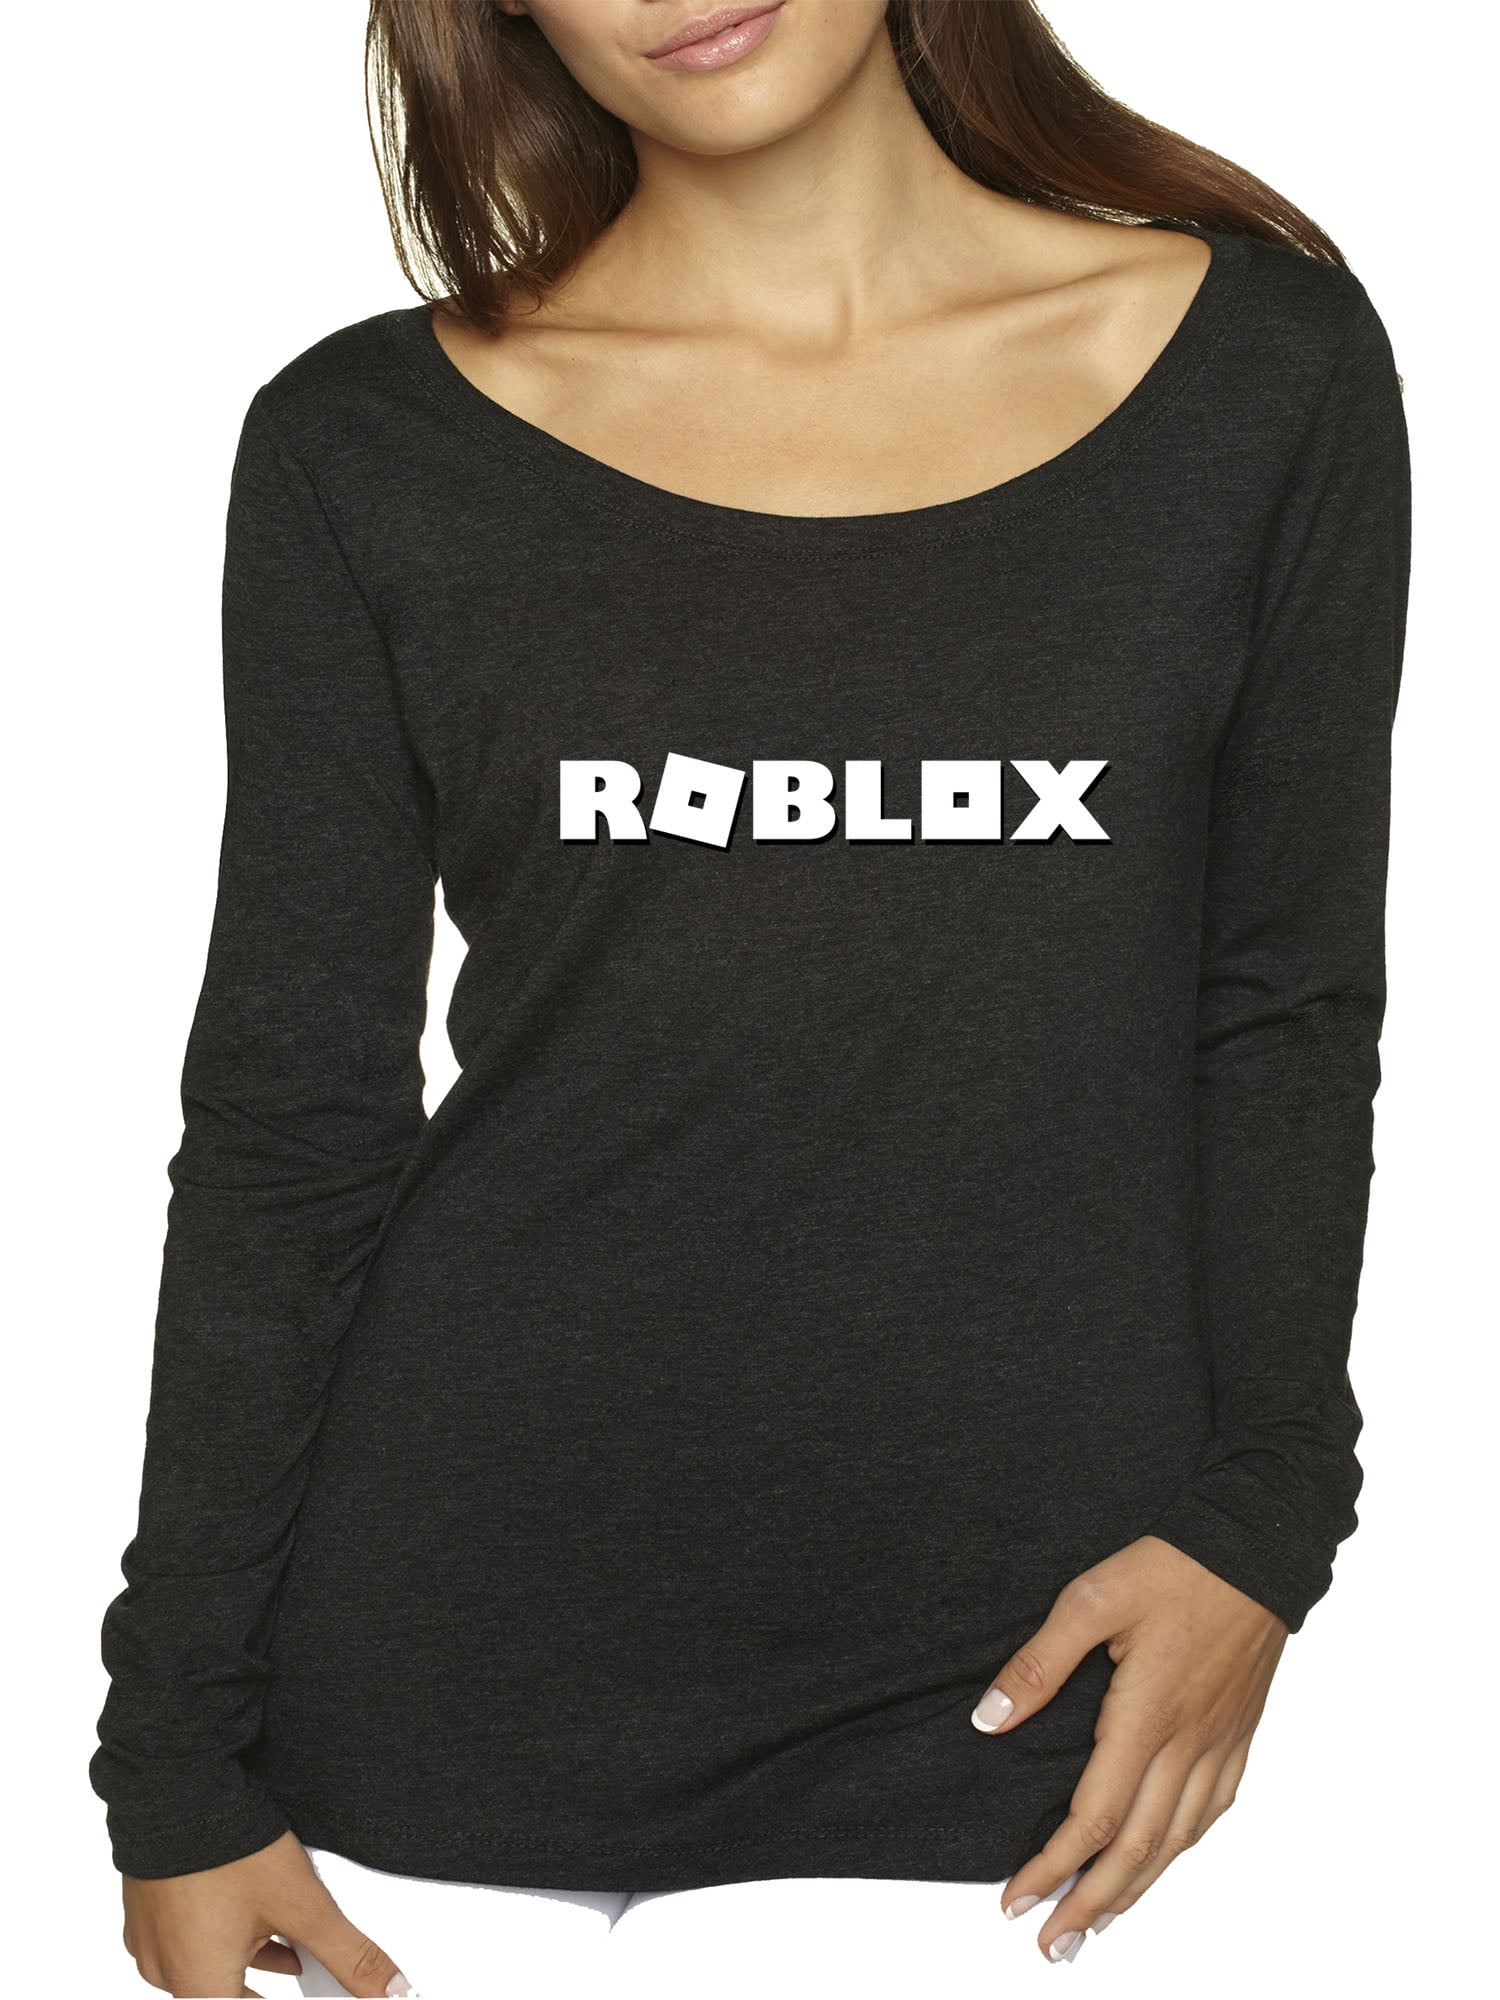 New Way 923 Womens Long Sleeve T Shirt Roblox Logo Game Accent Small Black - roblox game play young kids boys and girls red box gray tshirt tee small